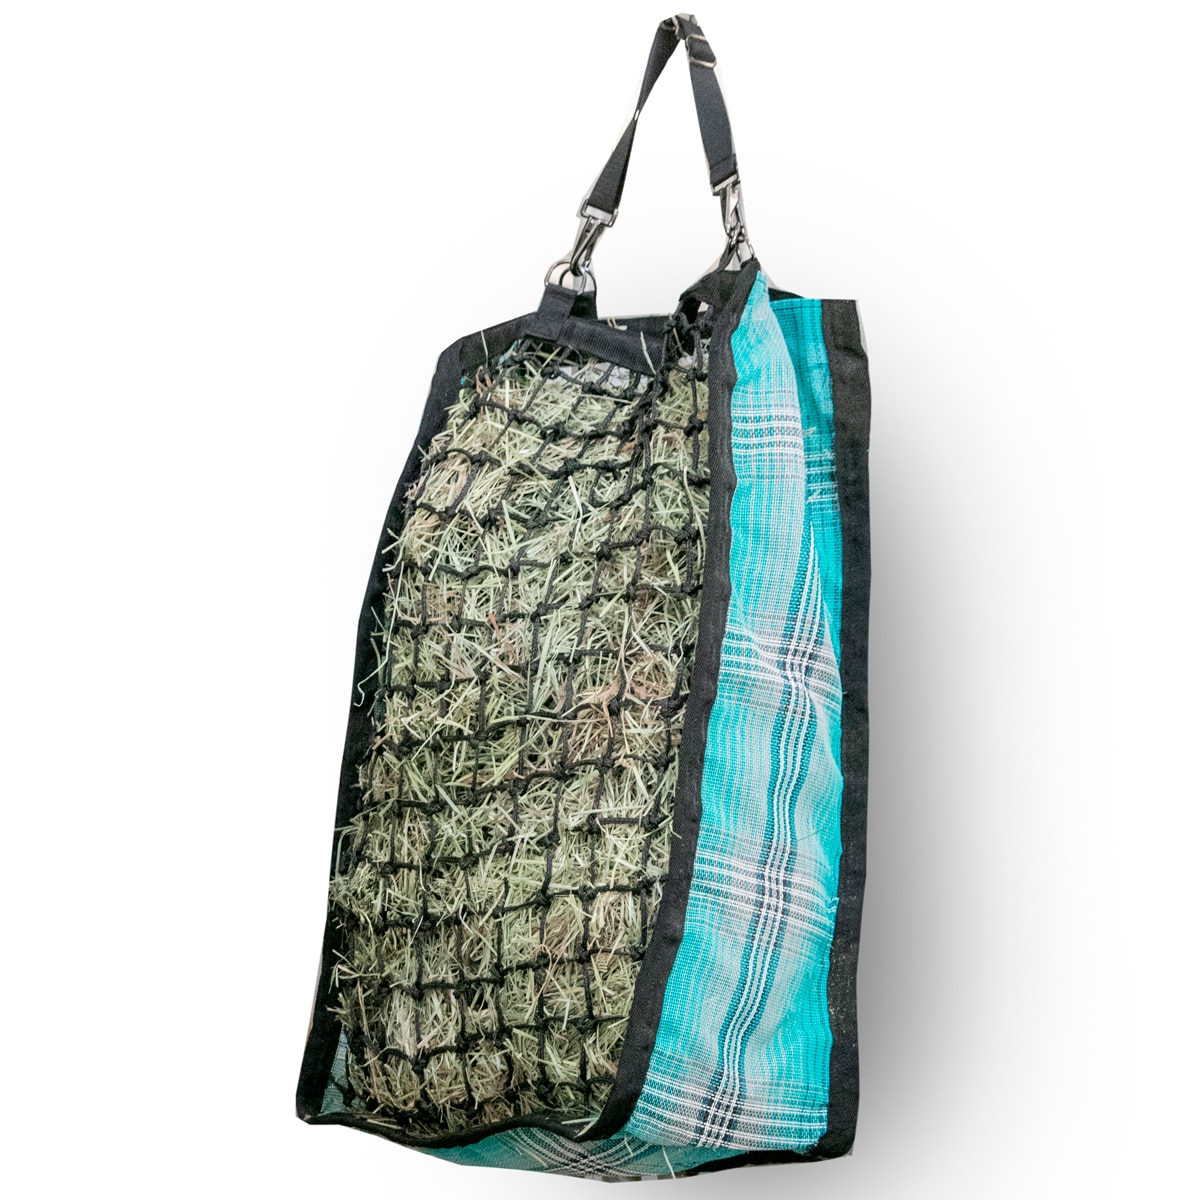 Colic-Free Feeding Kensington Slow Feed Hay Bag With Extra-Durable Nylon Straps Designed for Better Digestion 